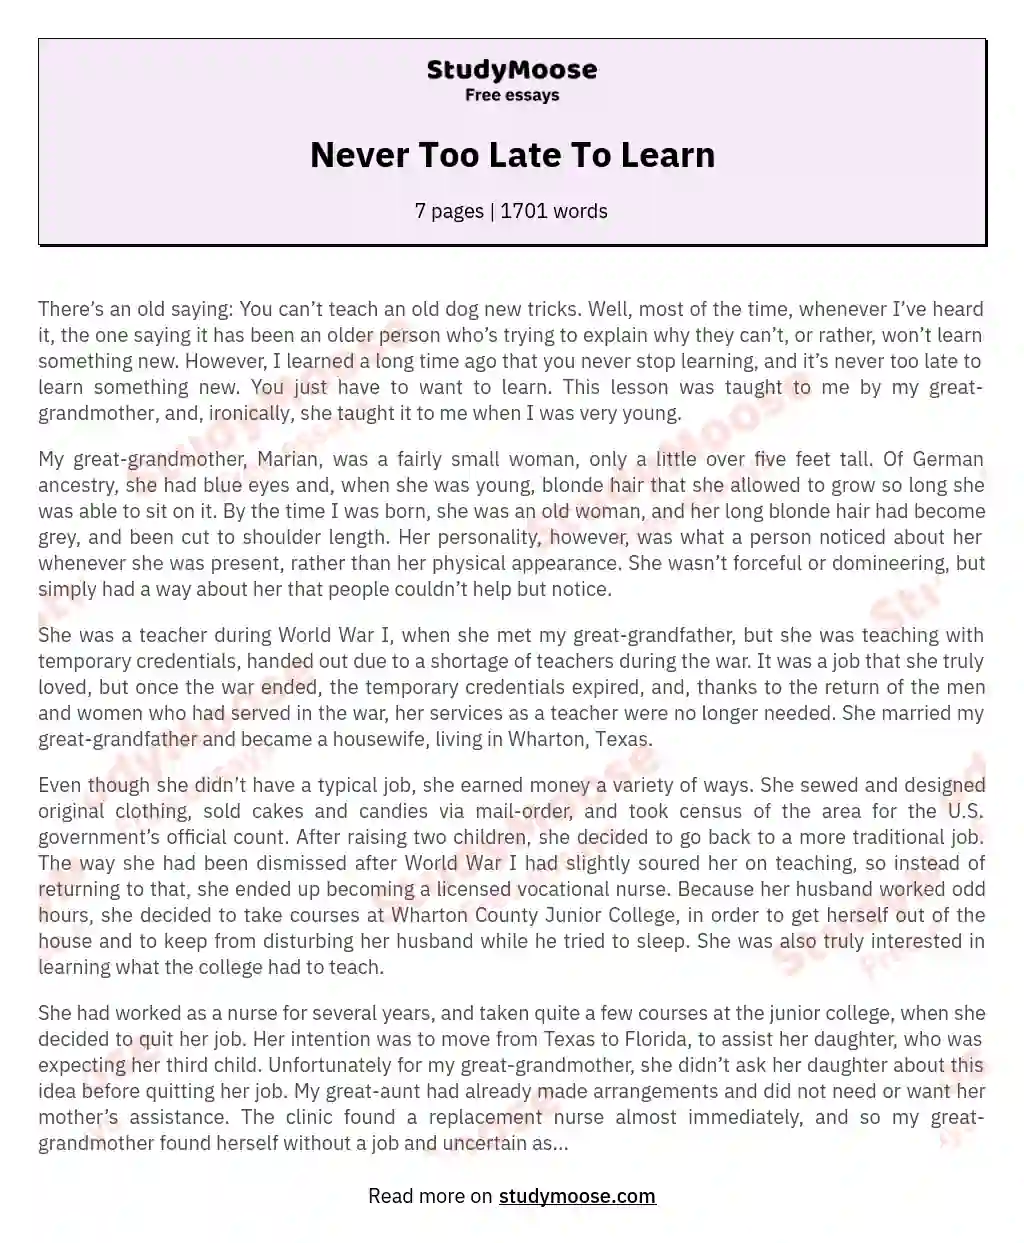 Never Too Late To Learn essay